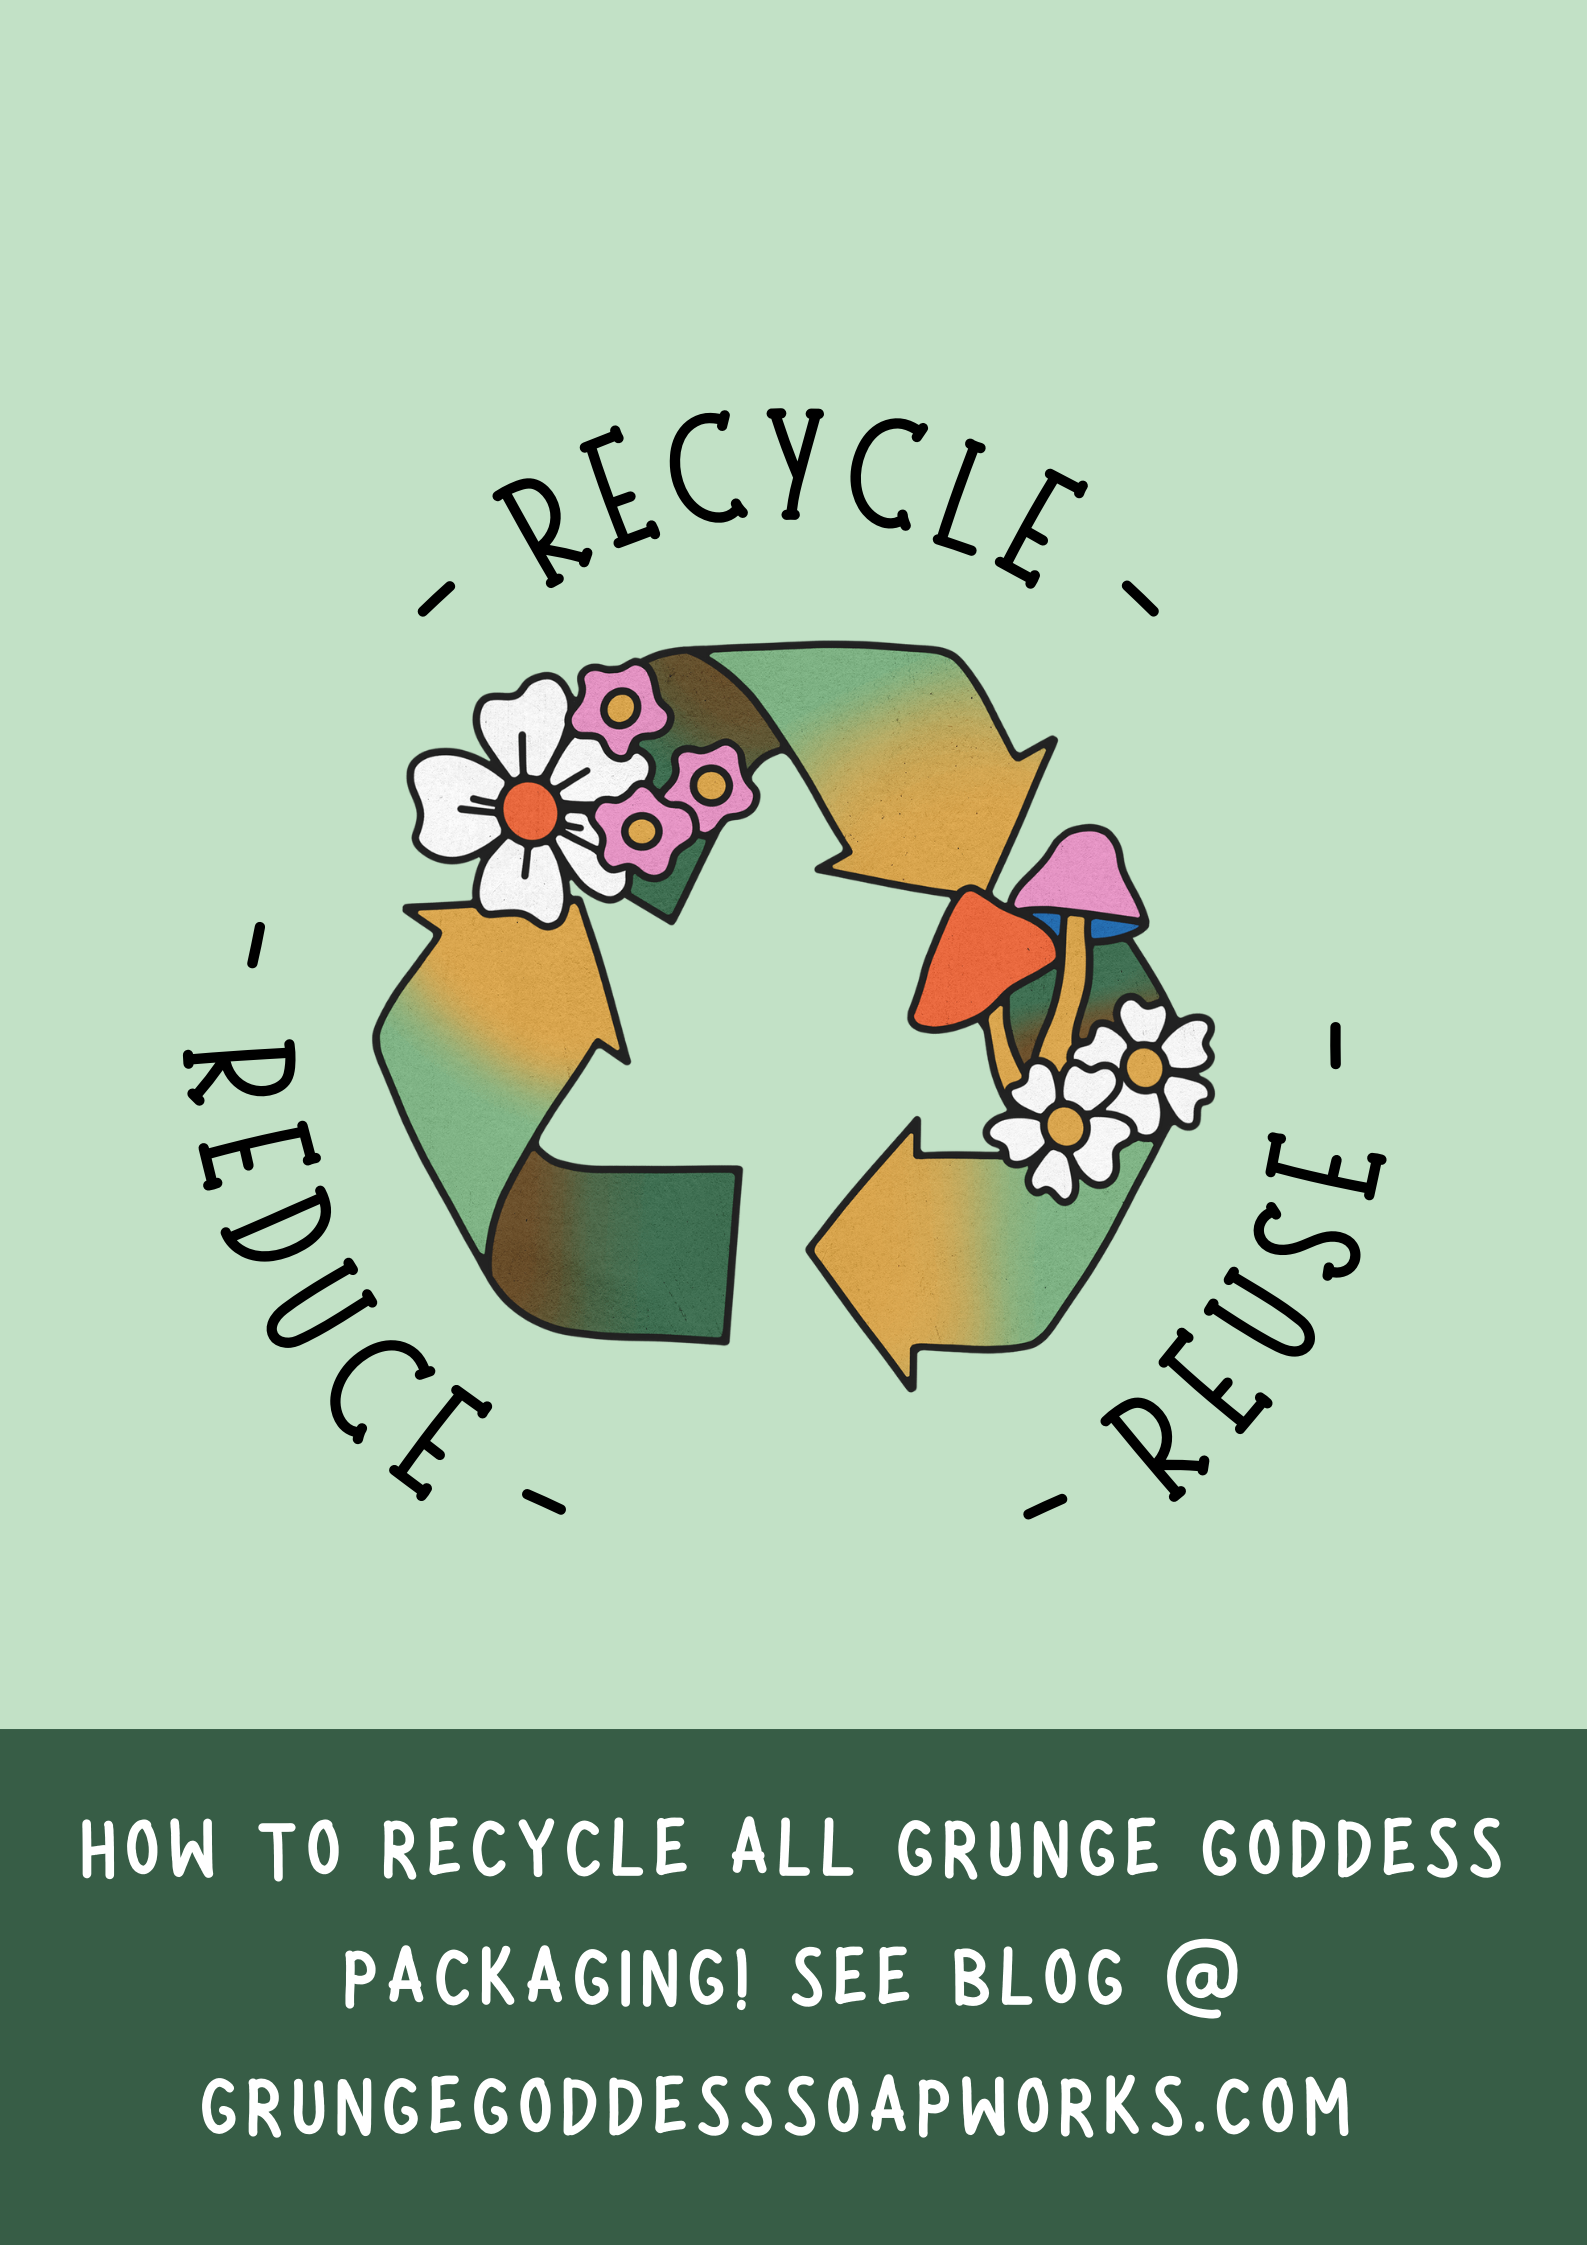 How to recycle Grunge Goddess packaging in your area